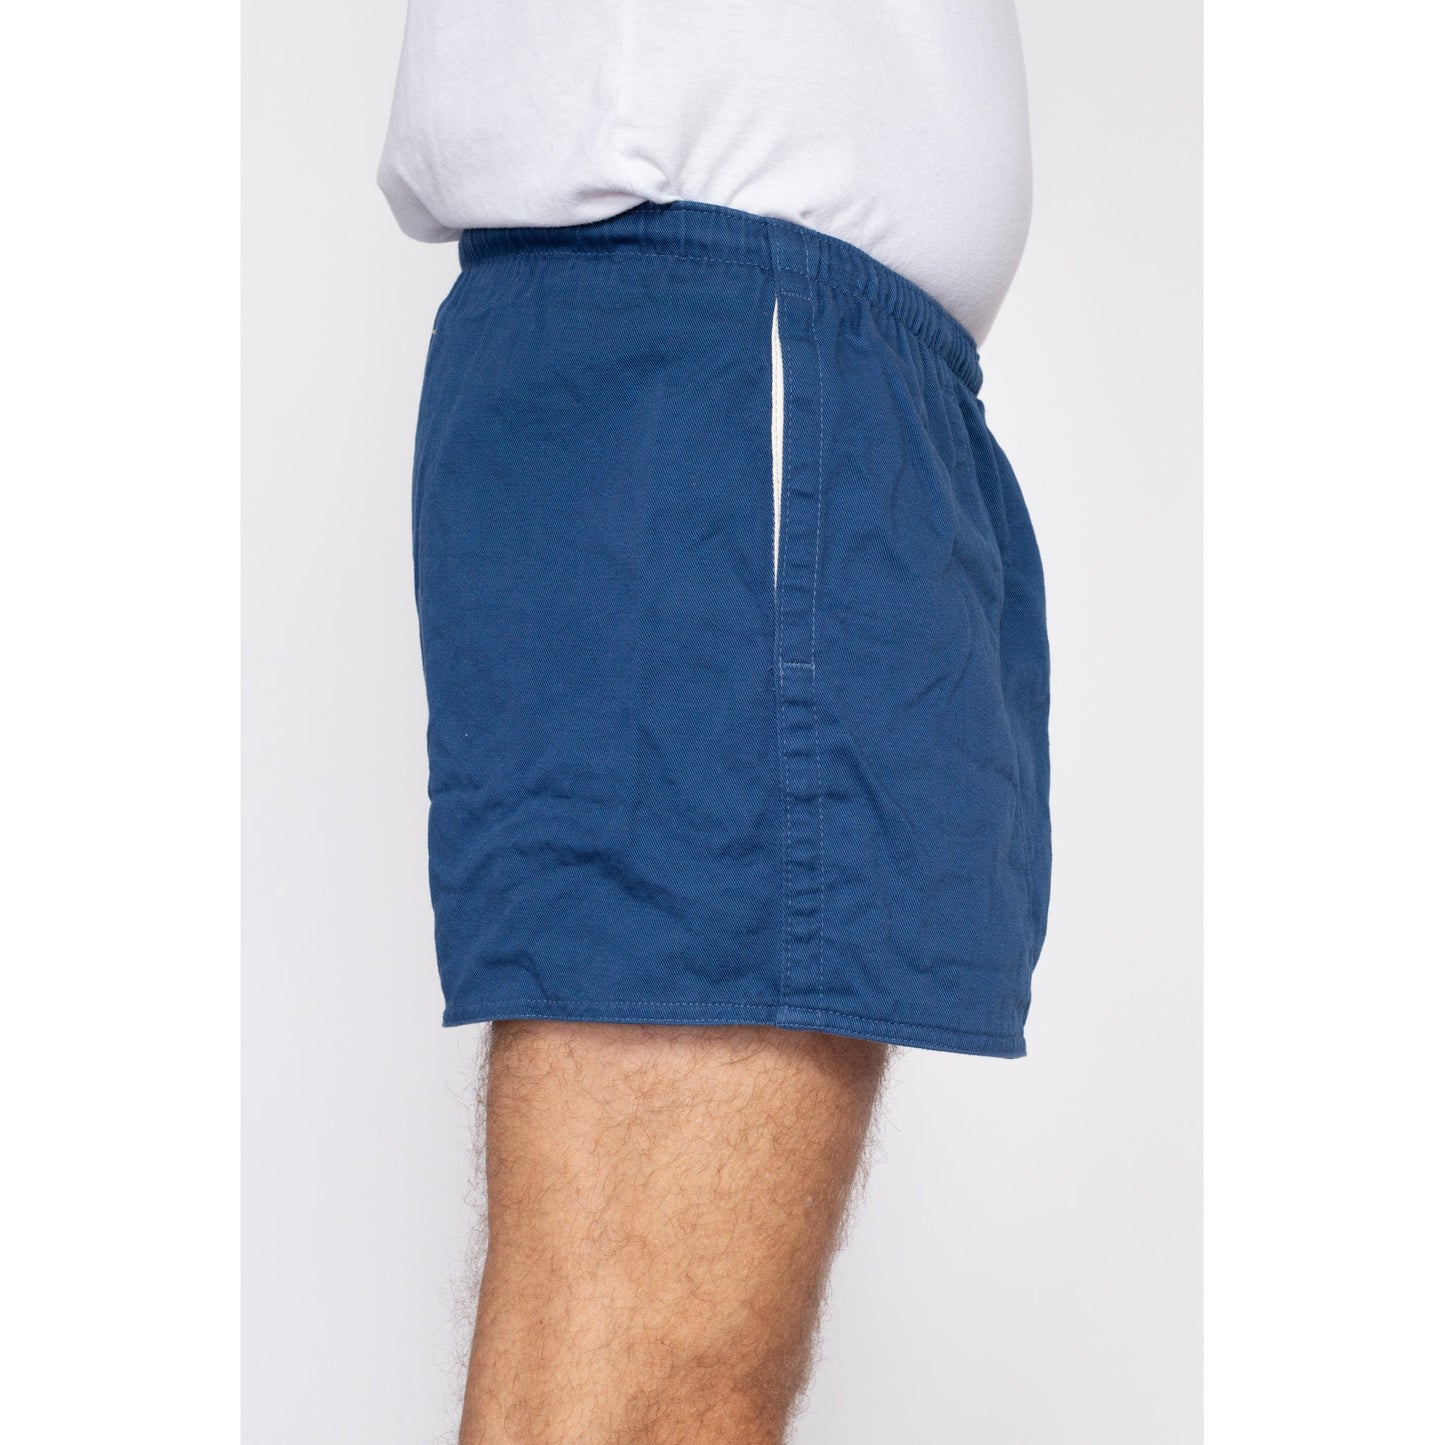 28"-36" Waist 80s Canterbury New Zealand Rugby Shorts | Vintage Blue Cotton Athletic Shorts